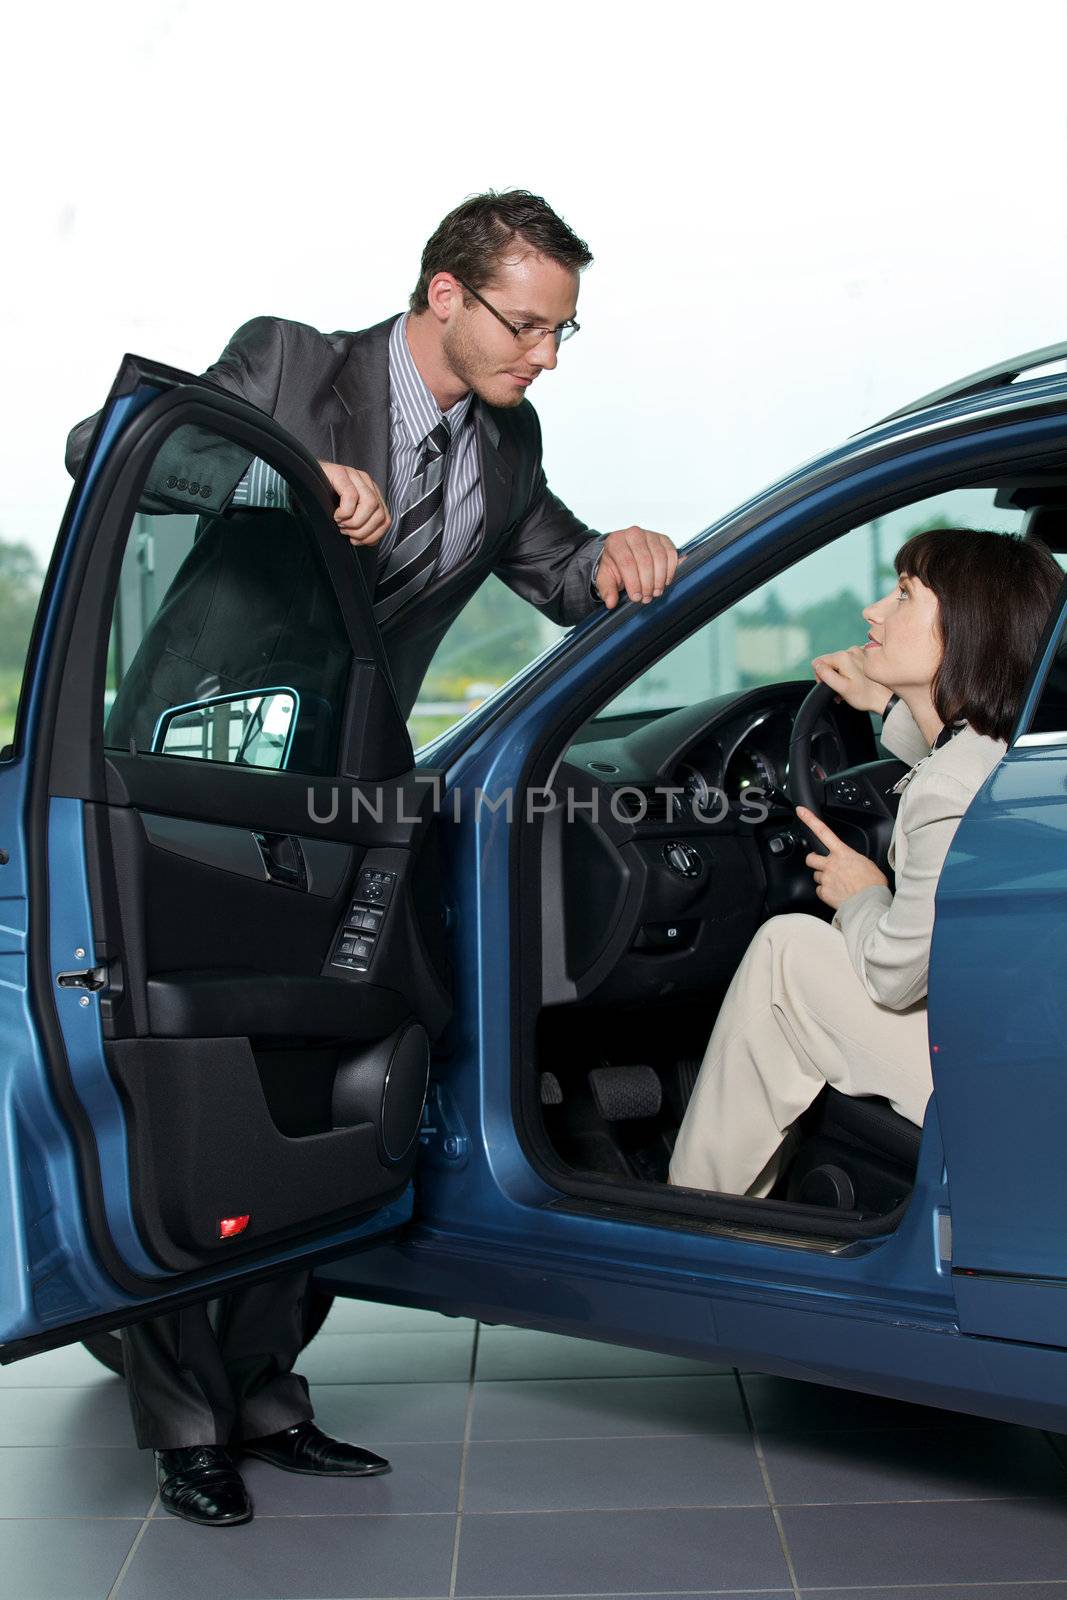 Car salesperson explaining car features to customer
